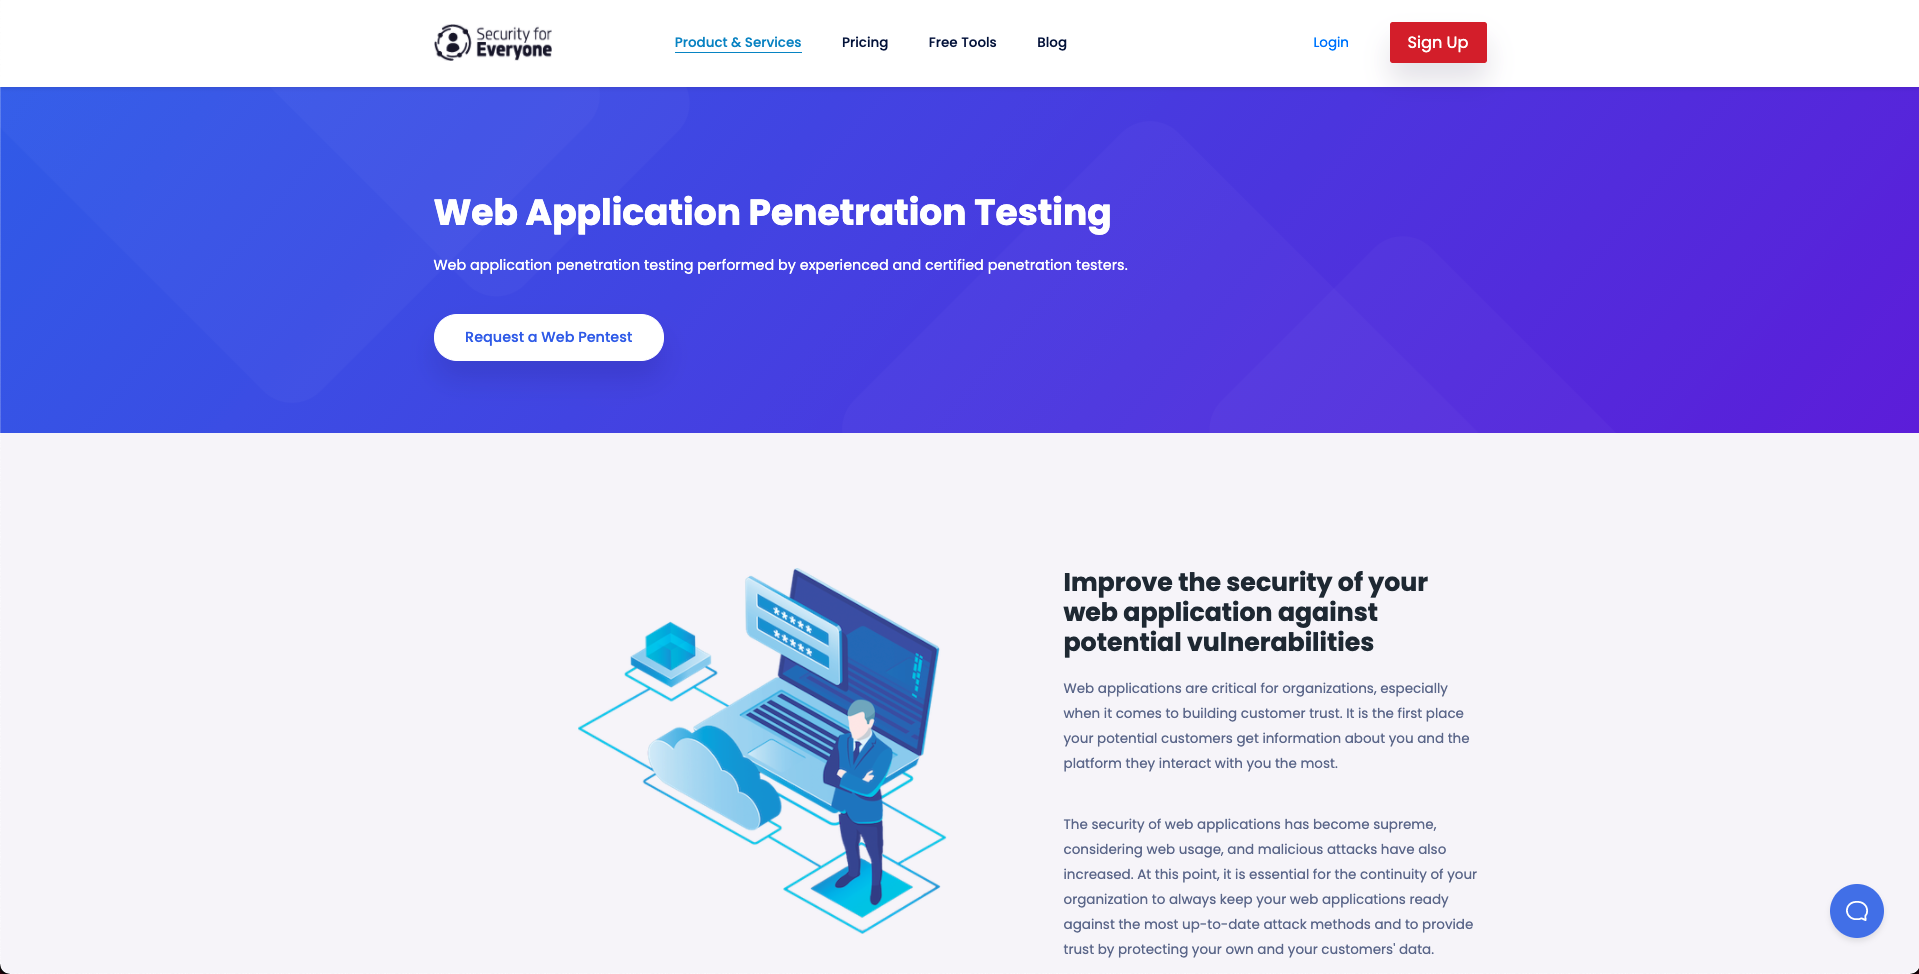 Web Application Penetration Testing-Security for Everyone